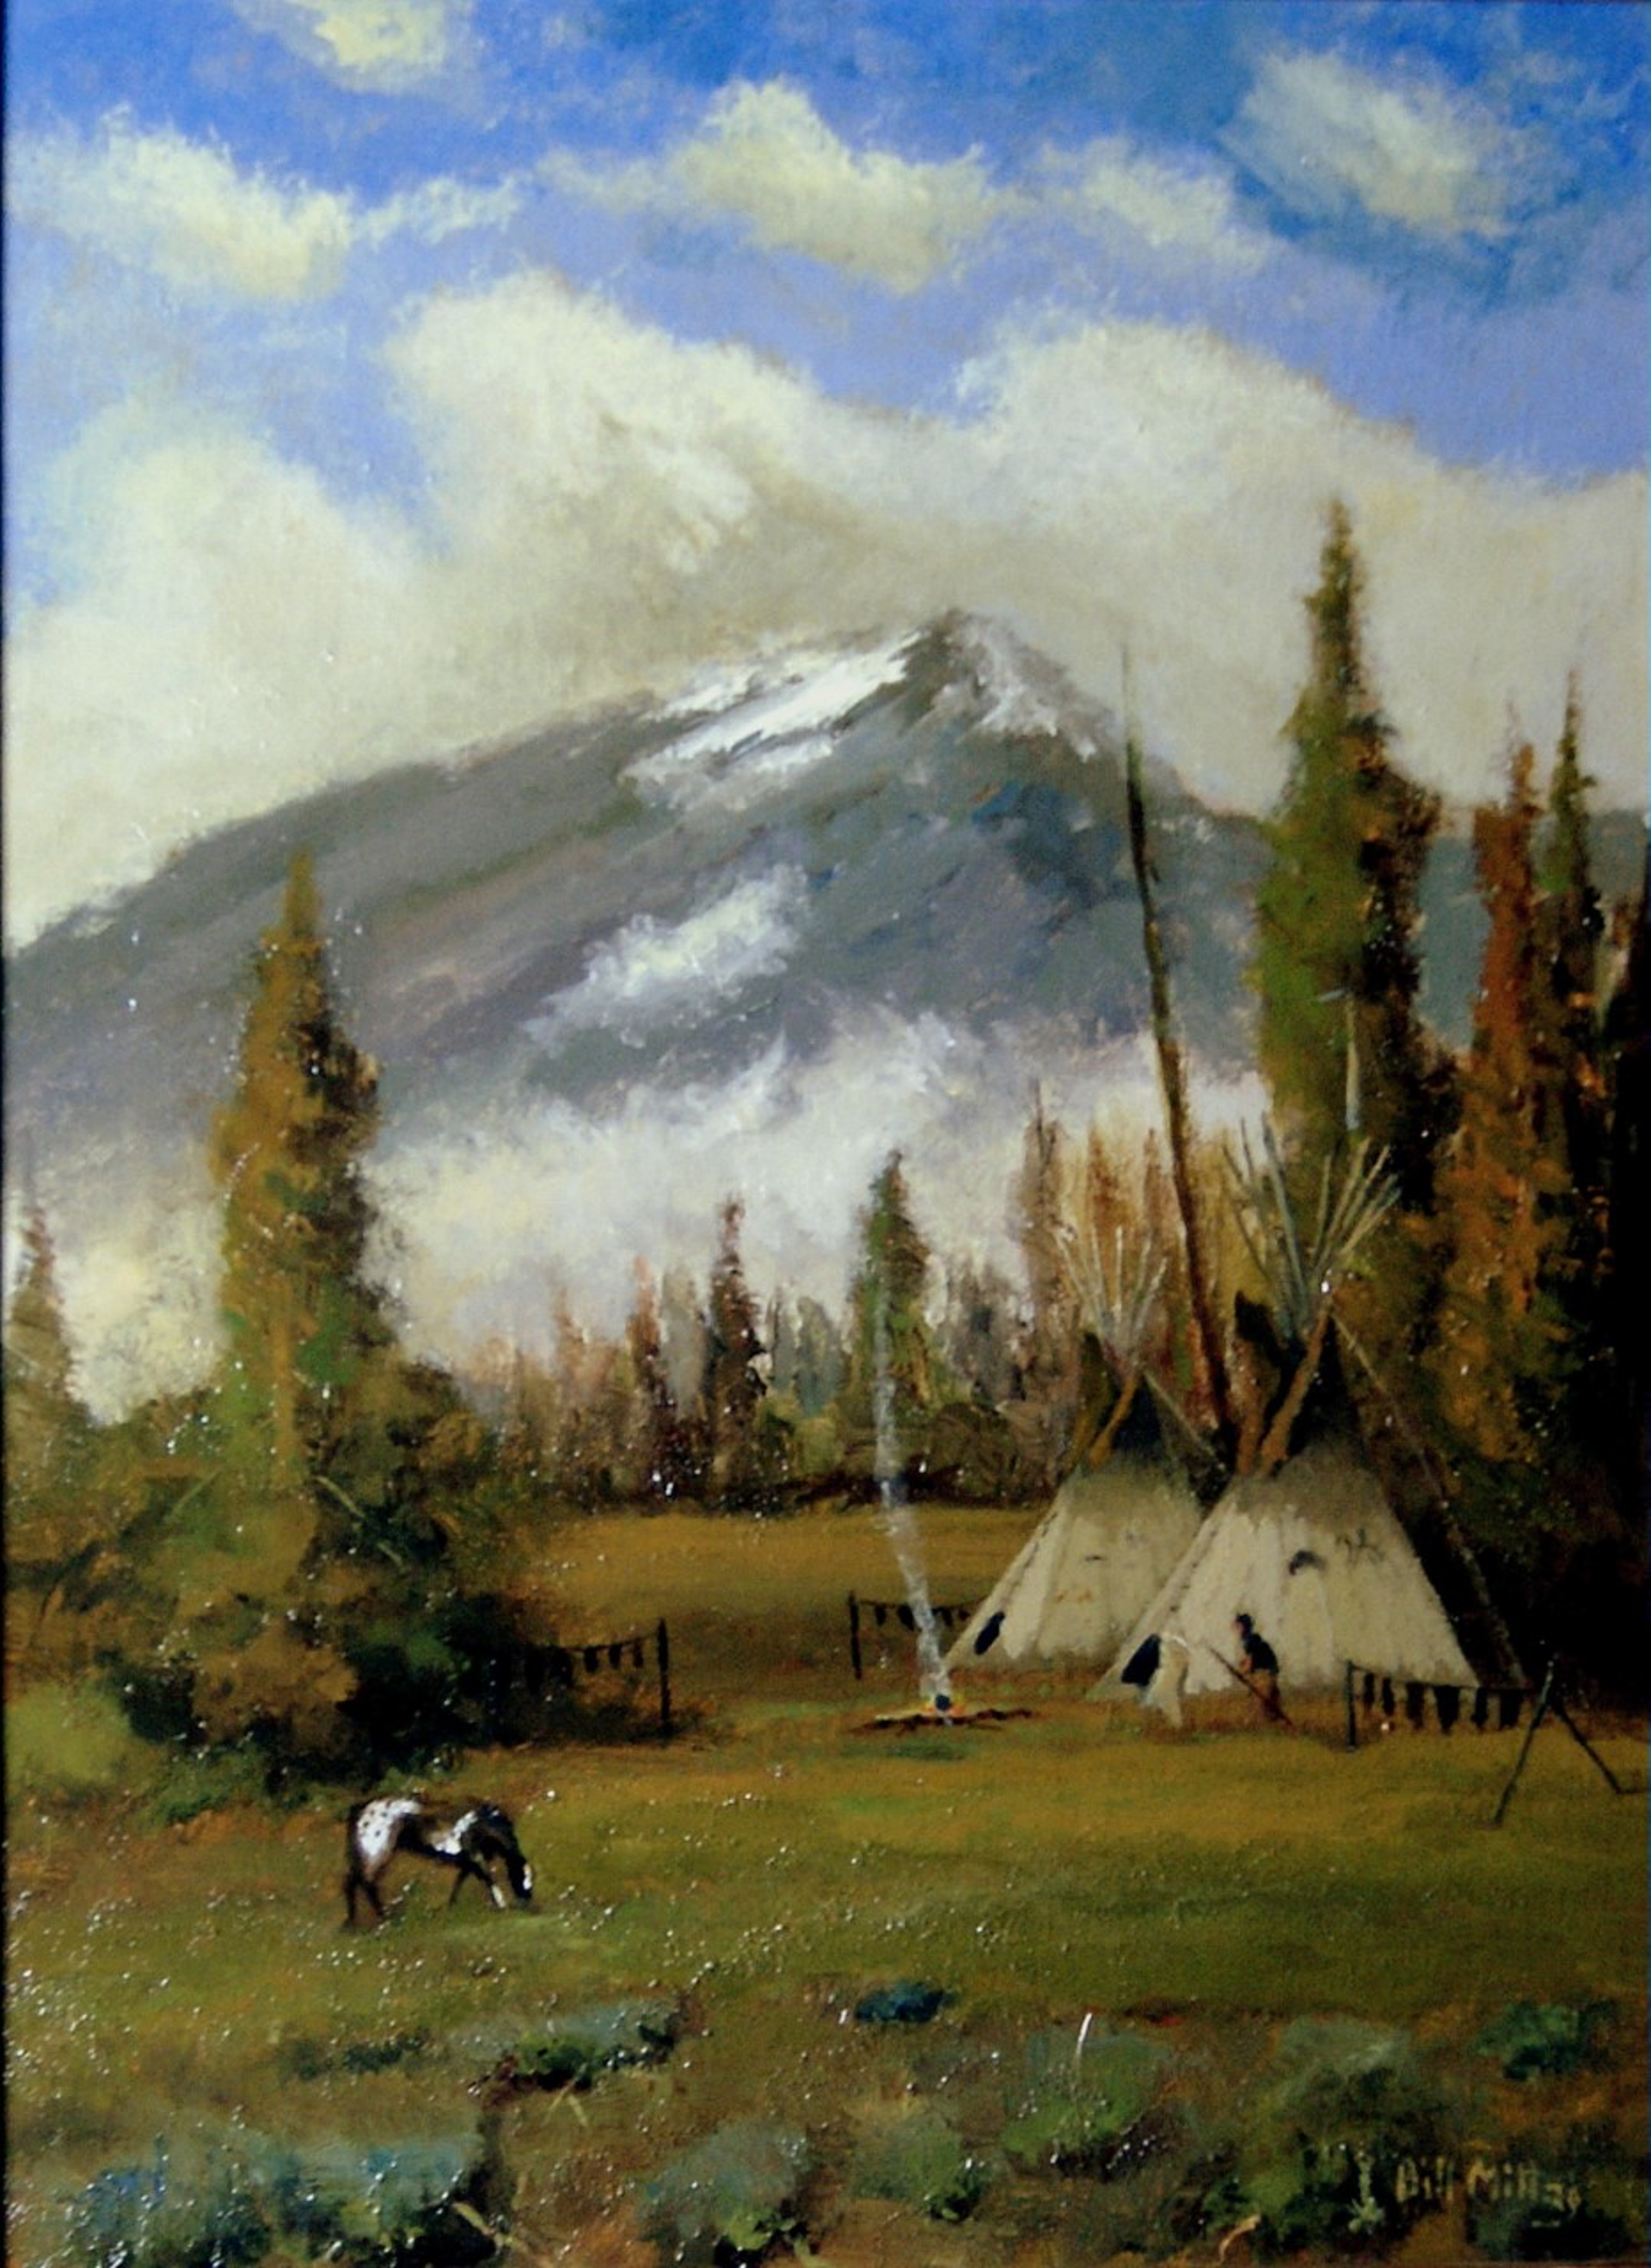 Their Camp in the Mountains by Bill Mittag